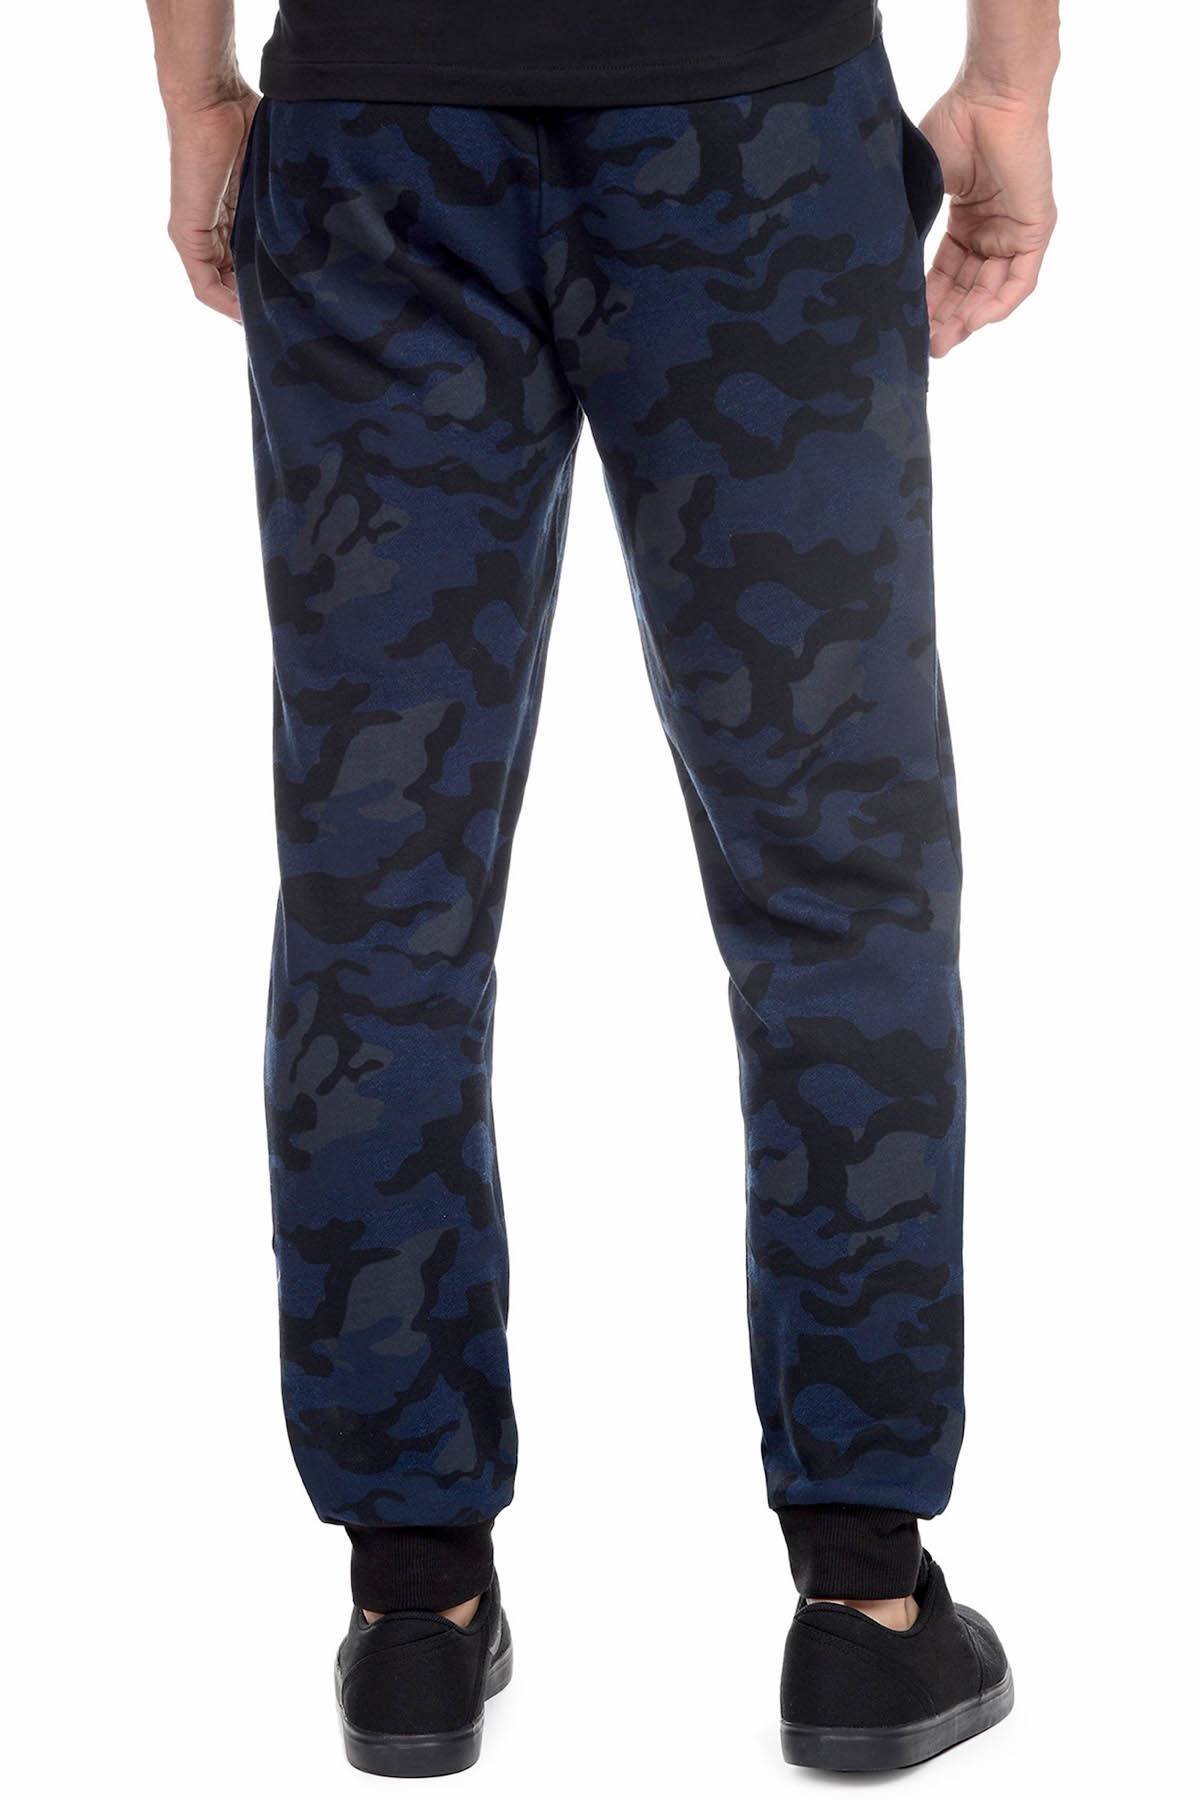 2(X)IST Blue-Camo Core French Terry Sweatpant